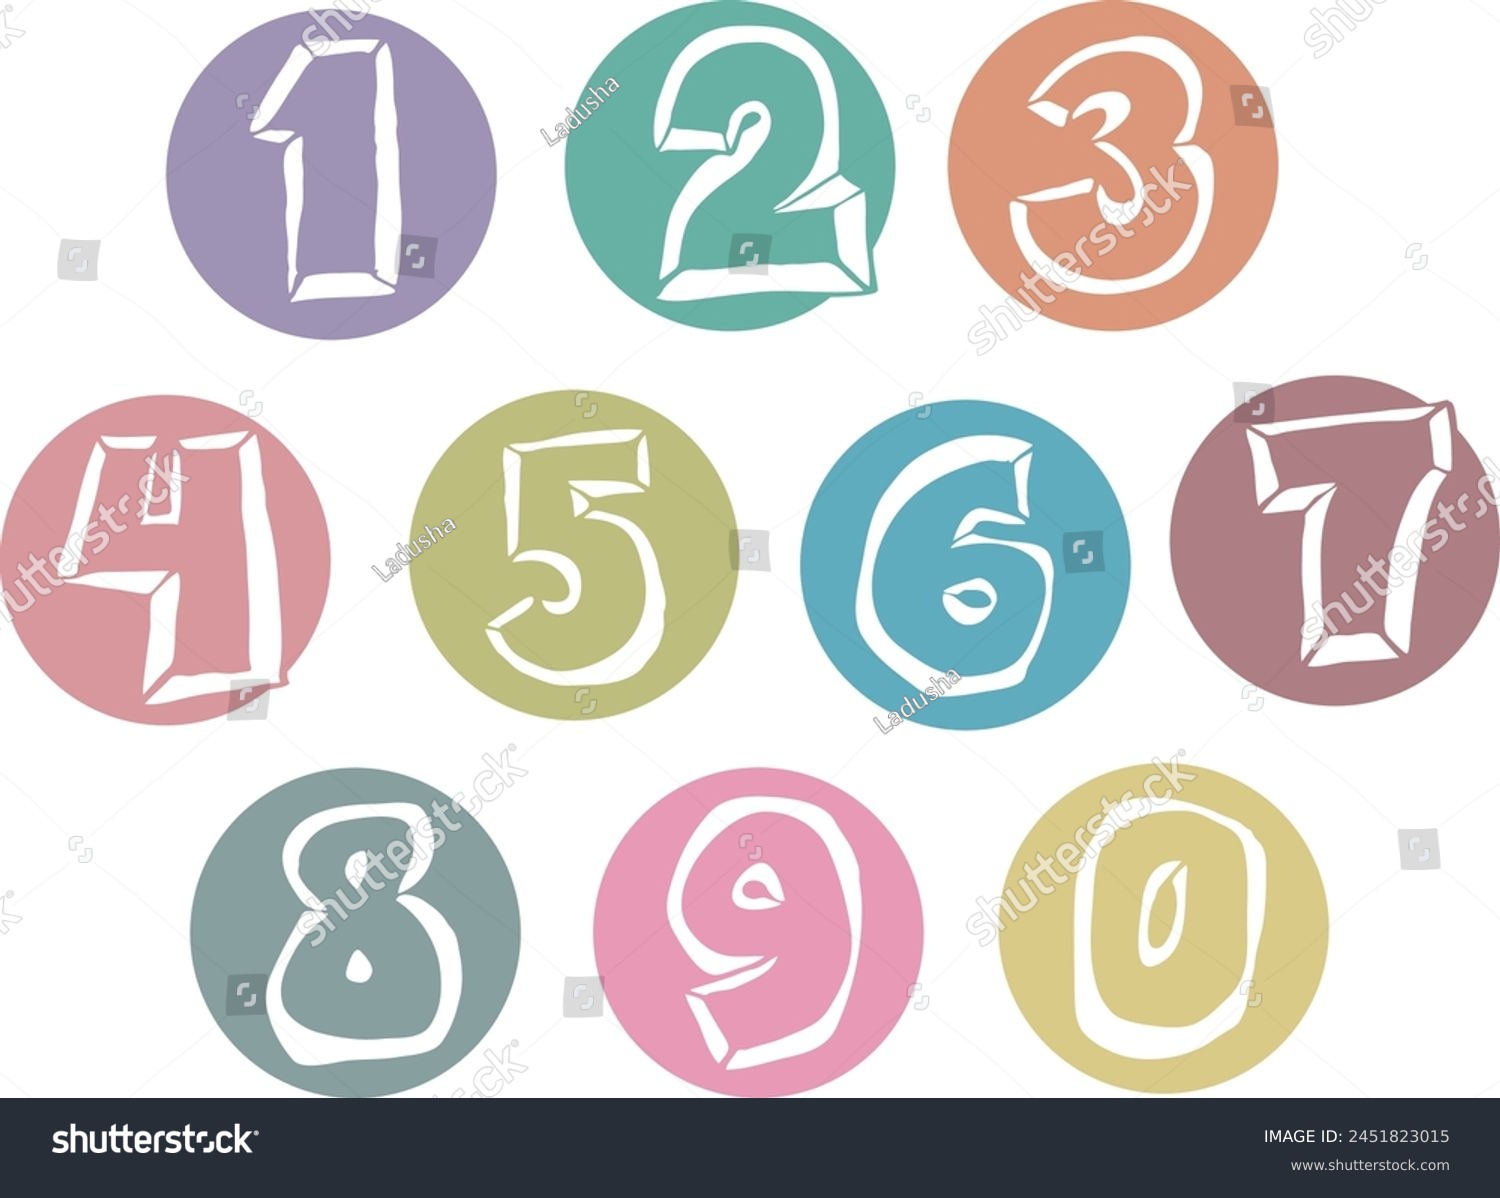 SVG of Numbers set for greeting cards, birthday or wedding invitation. Hand drawn illustration, cartoon style. 1234567890. Decorative vector element geometric or floral design. svg